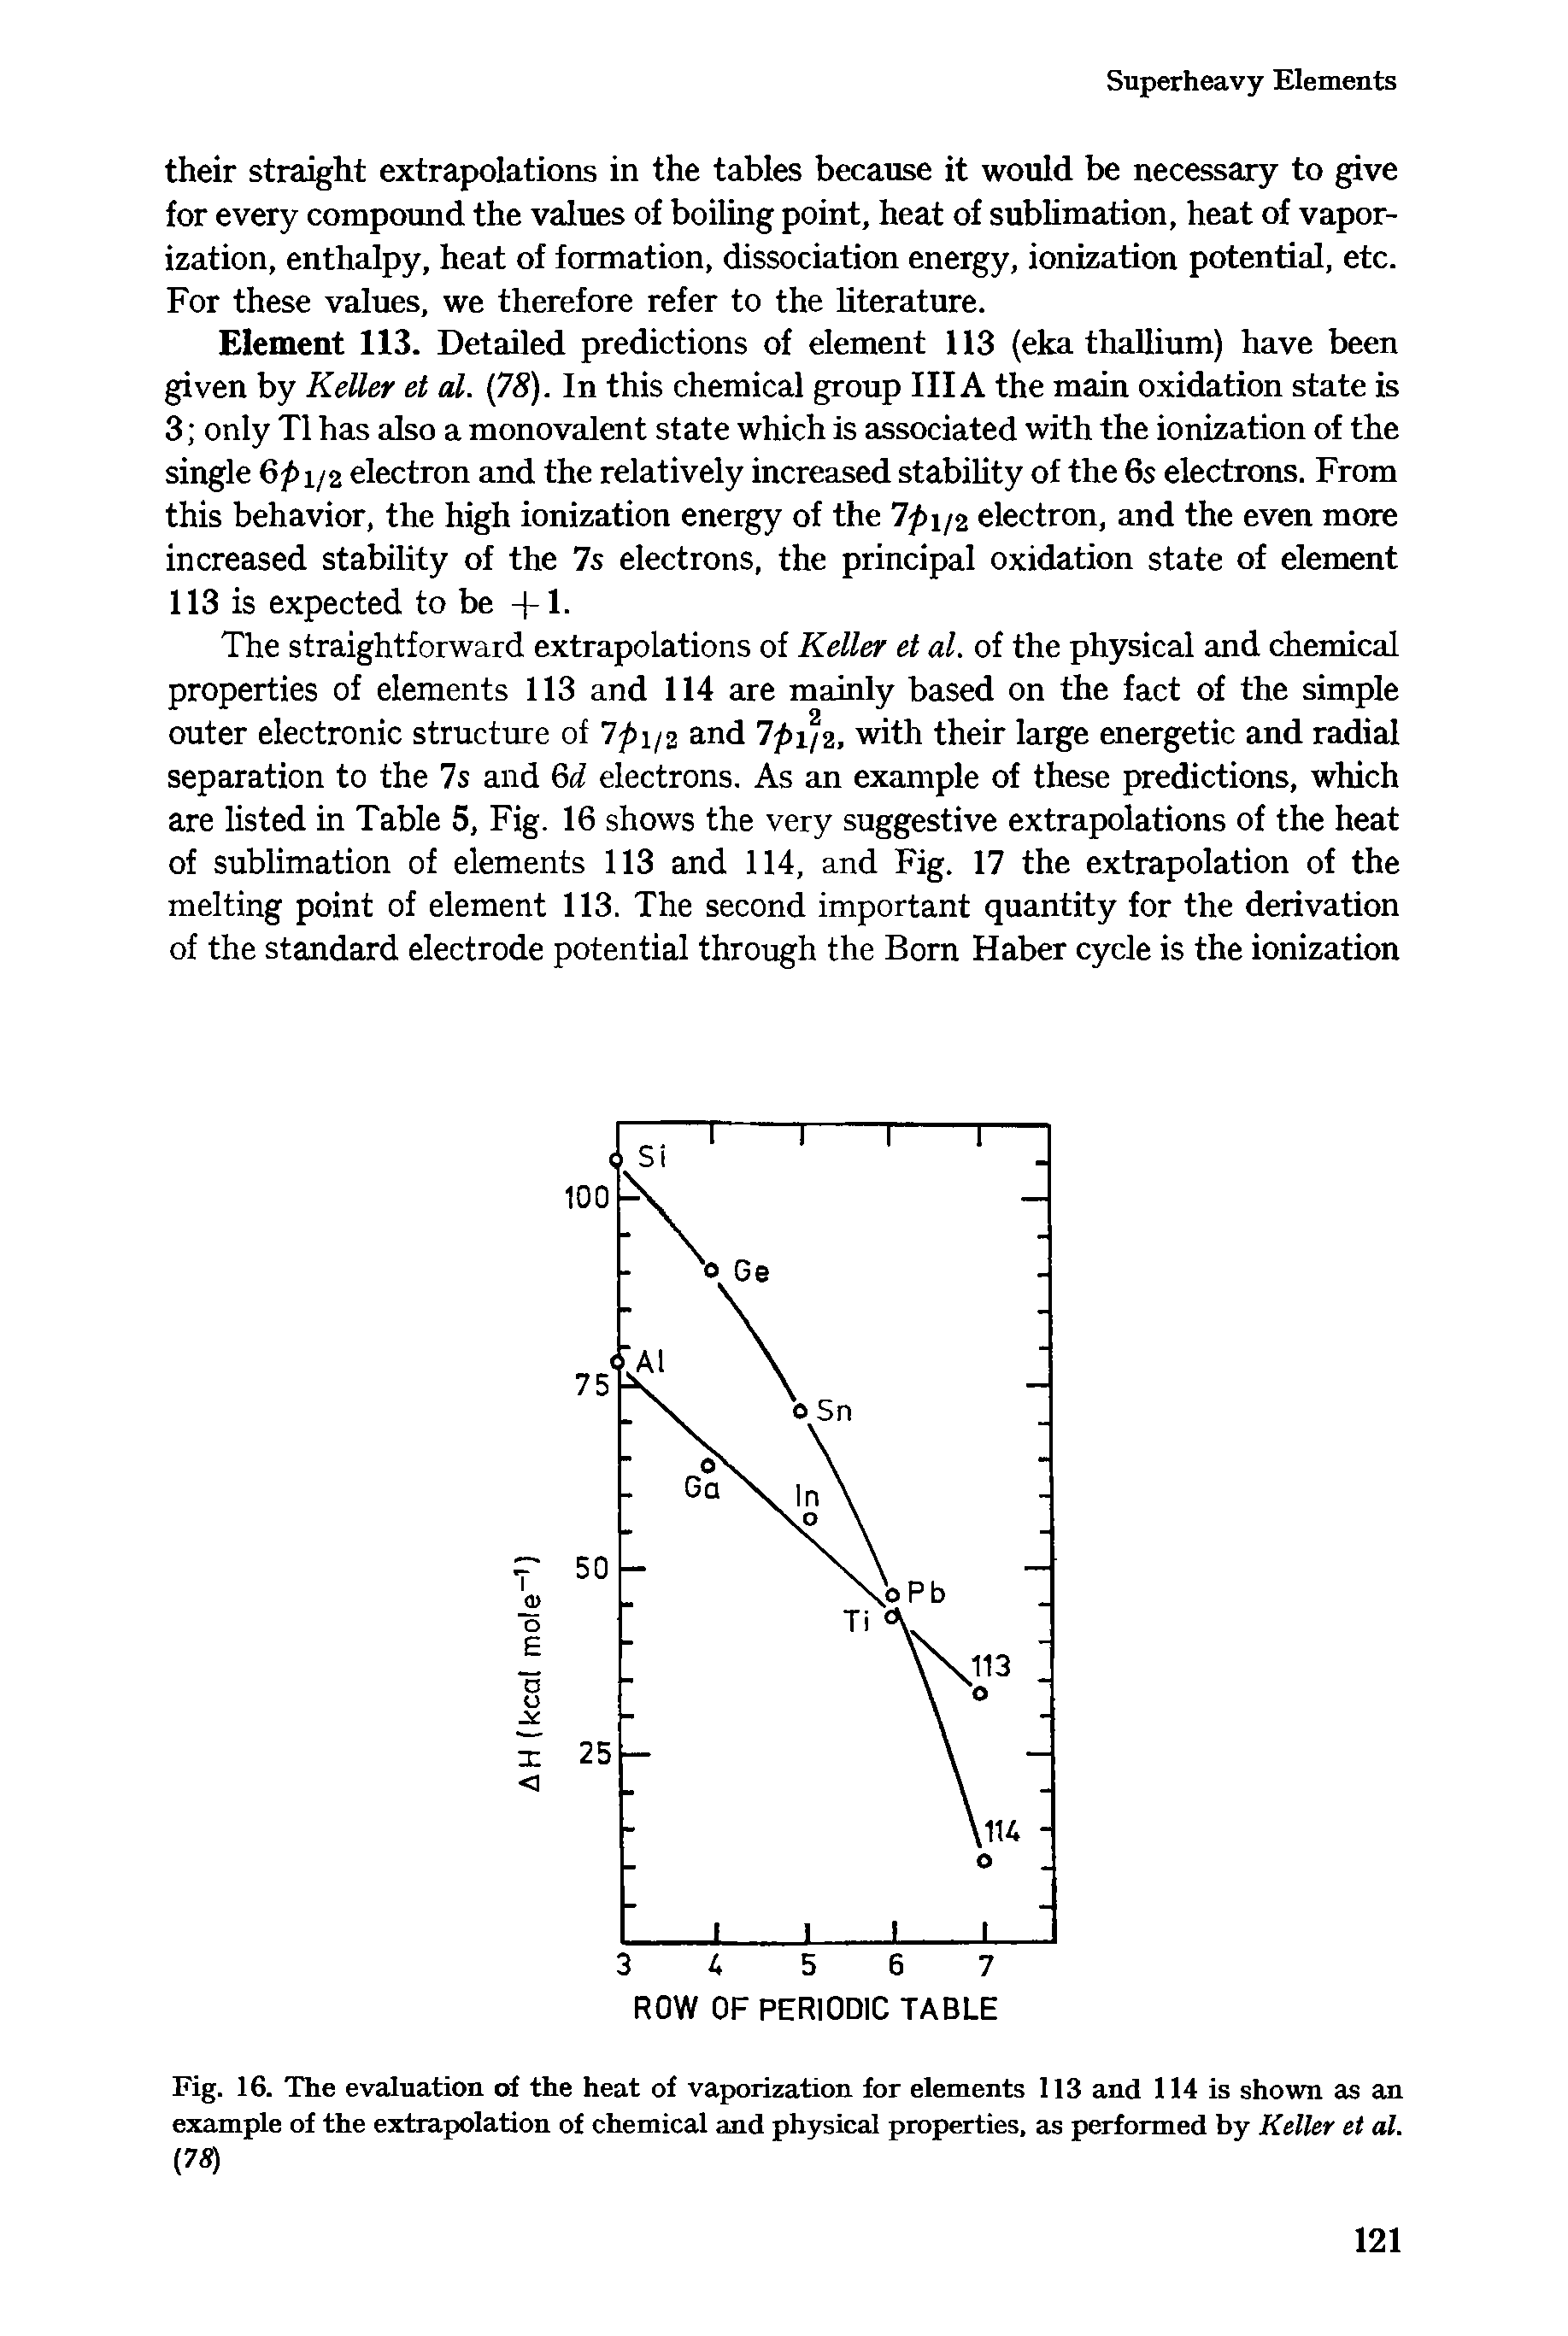 Fig. 16. The evaluation of the heat of vaporization for elements 113 and 114 is shown as an example of the extrapolation of chemical and physical properties, as performed by Keller et al. (78)...